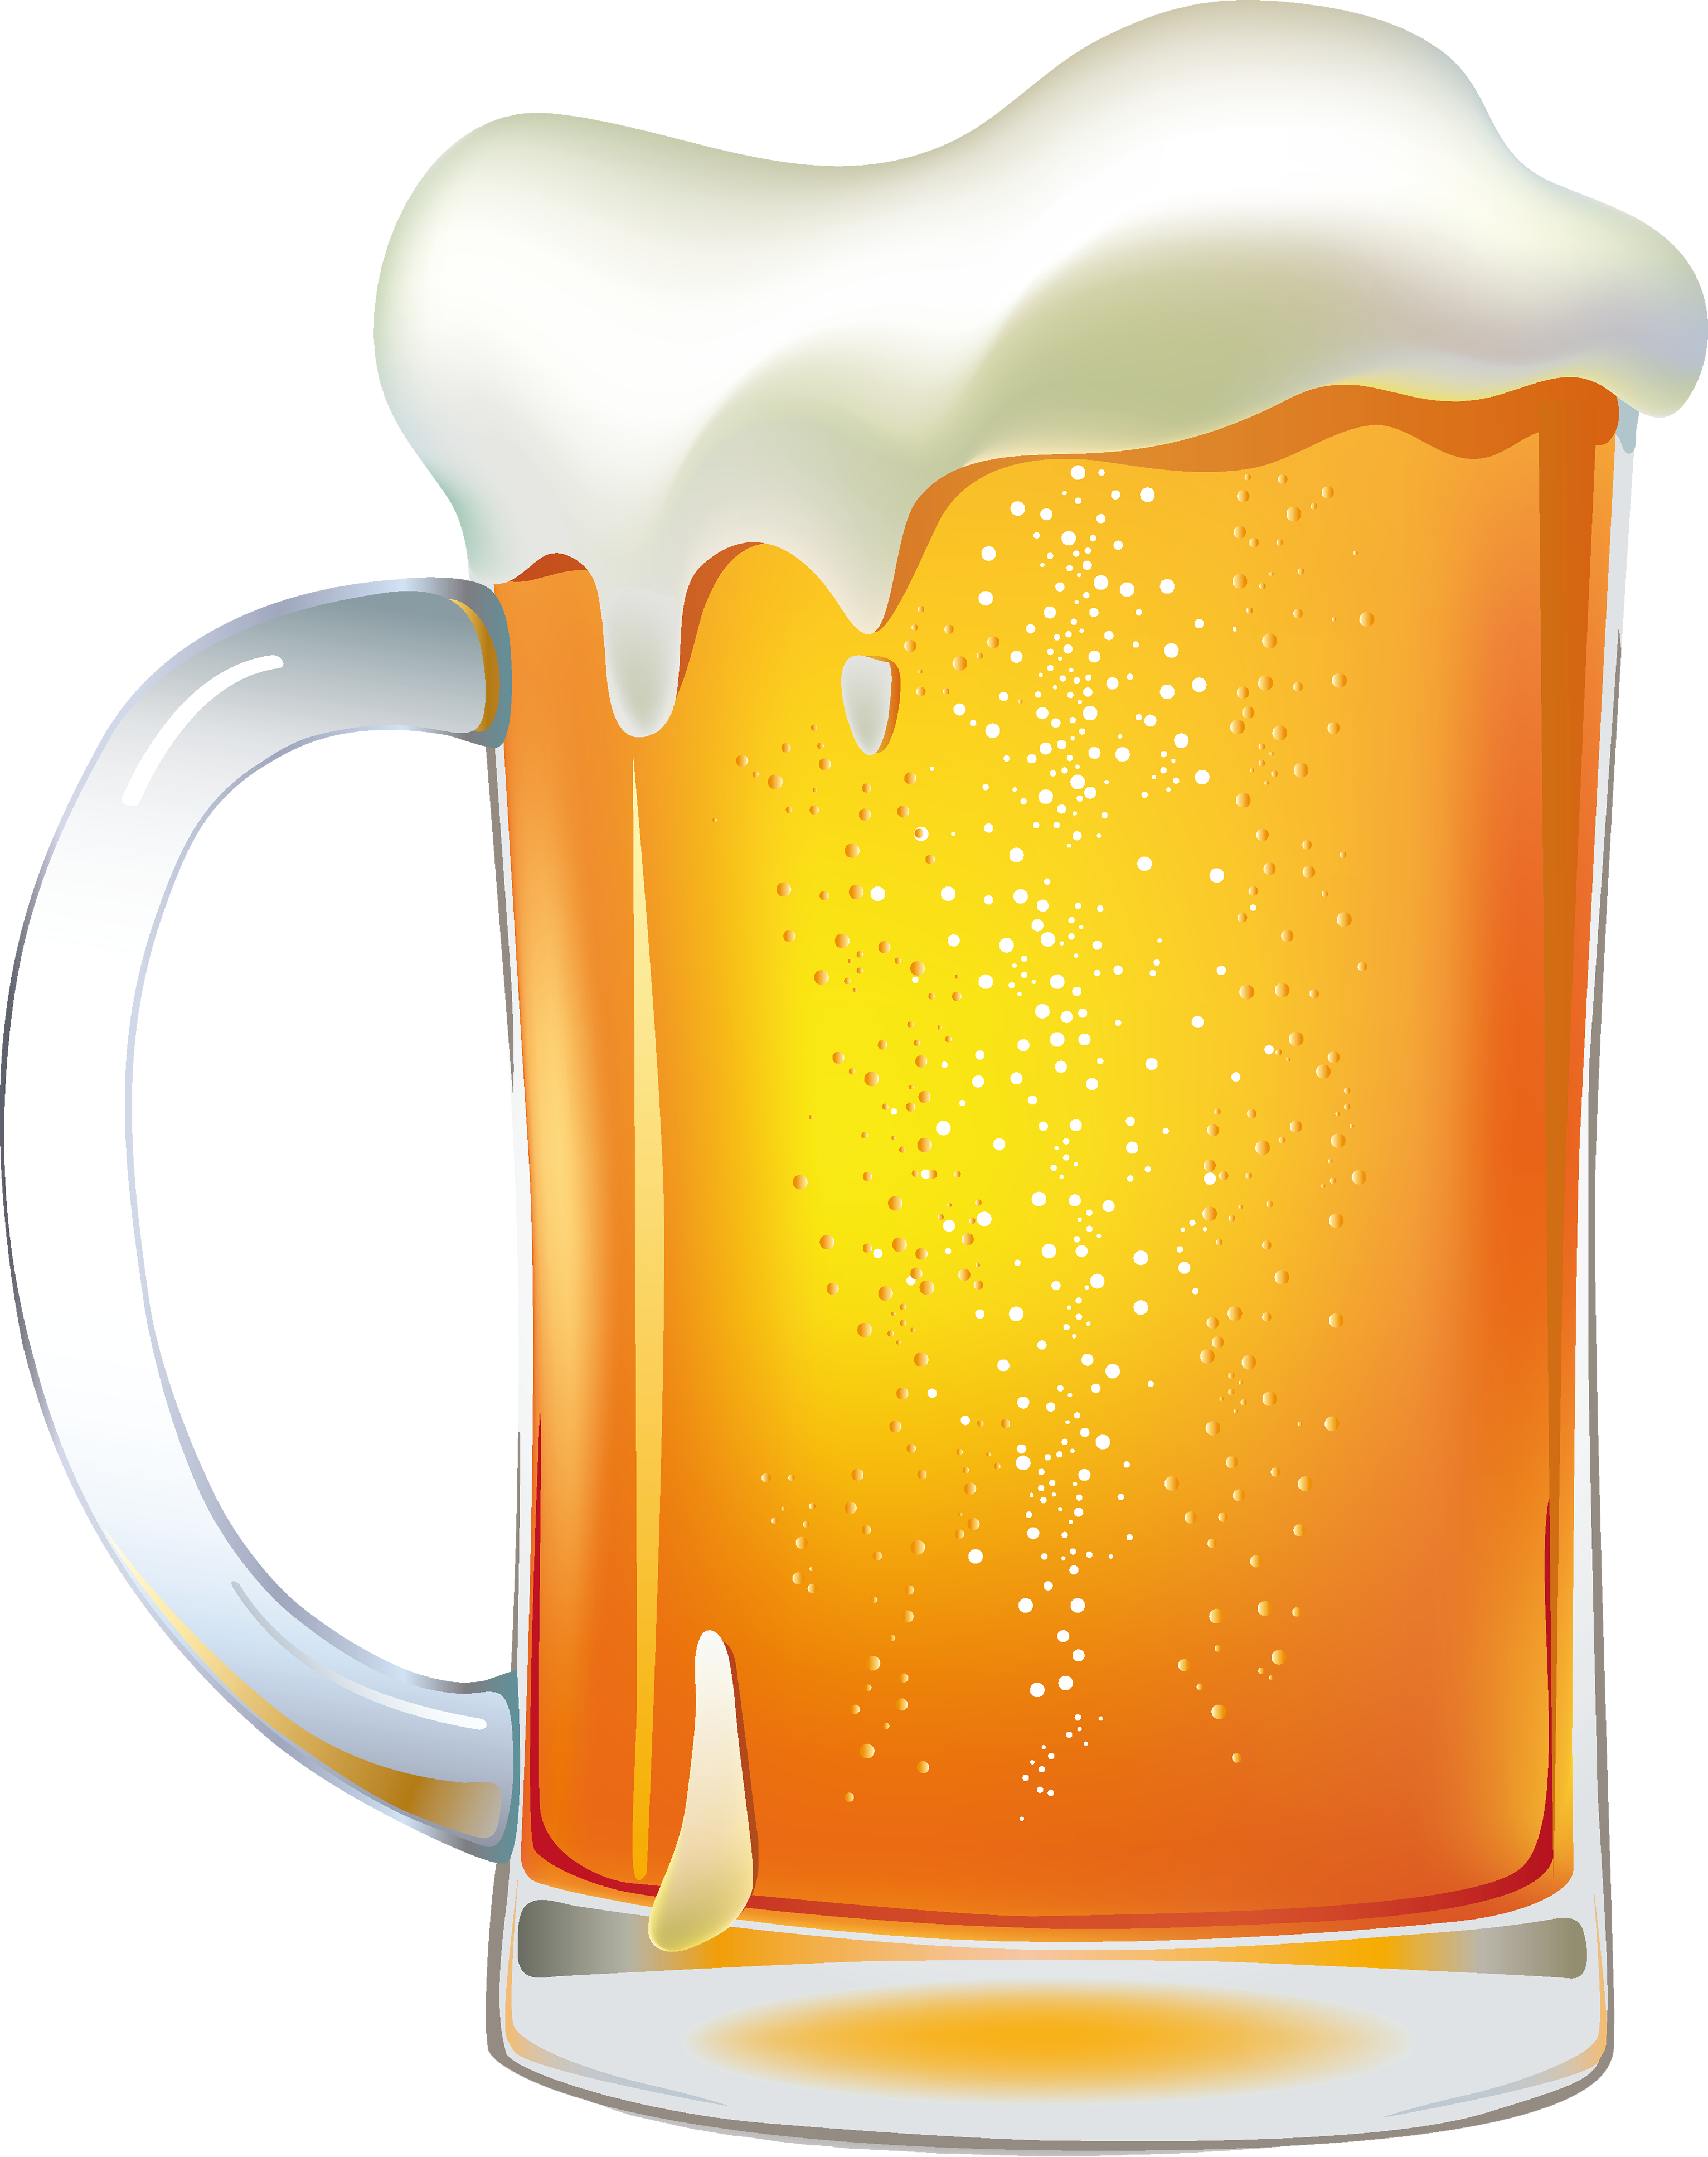 Beer png image backgrounds. Crafts clipart pen cup